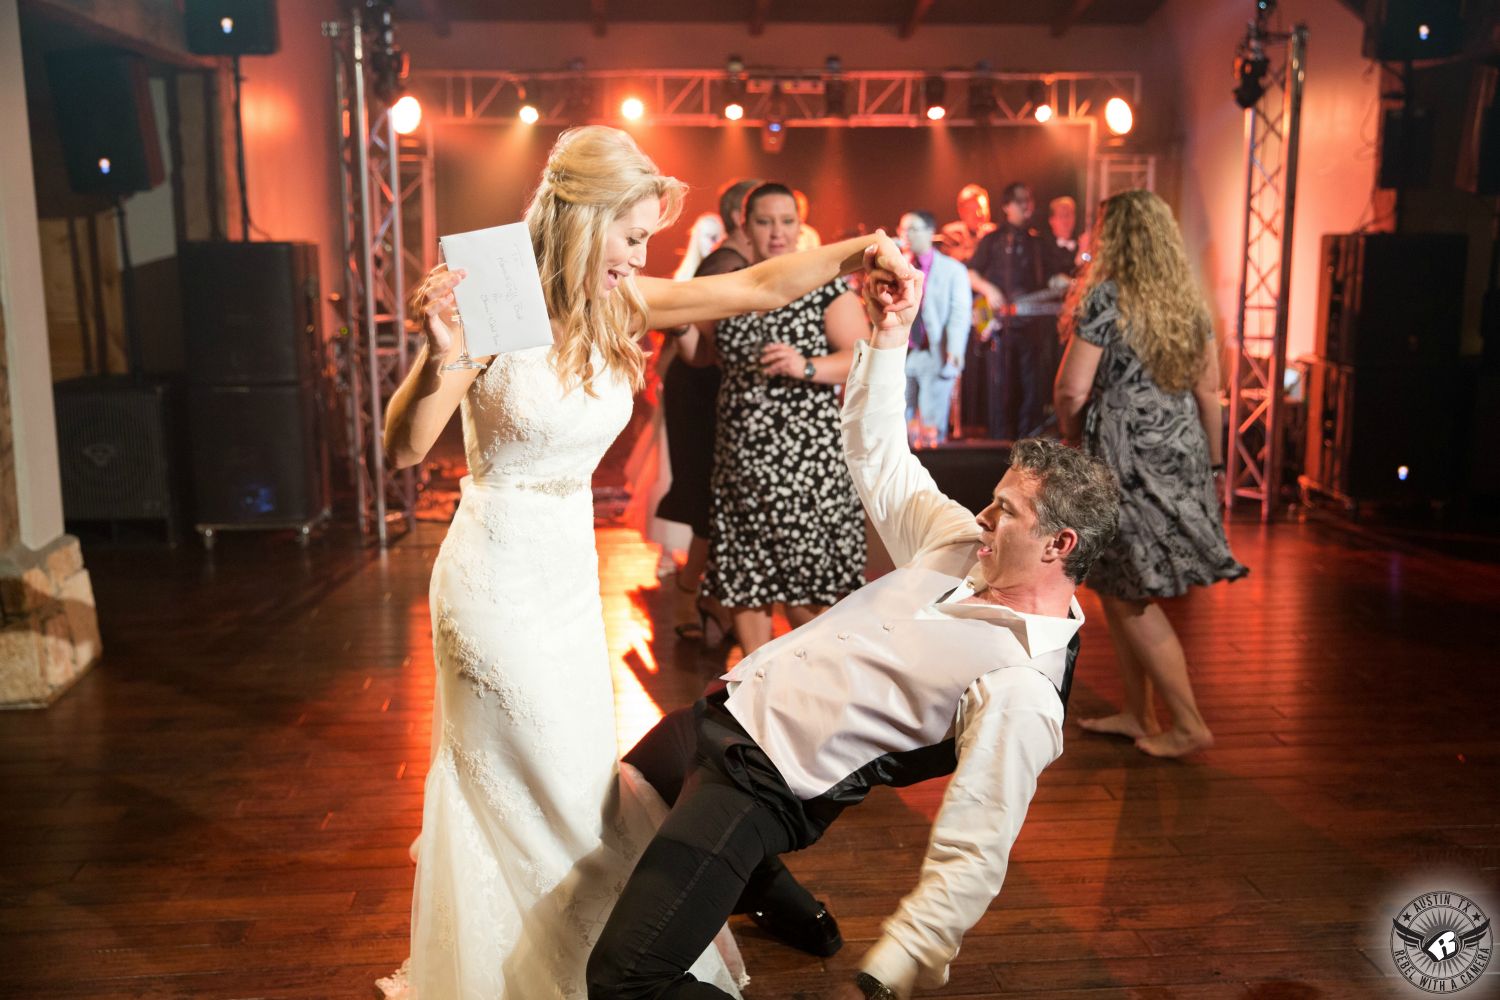 Wedding picture of groomin black tuxedo pants and white vest dancing with blonde bride with hair down at their wedding reception at Camp Lucy Dripping Springs wedding venue with fabulous orange stage lighting during wedding coordinated by Your Wedding, Your Way, Austin wedding Planner with the Pictures band playing on stage taken by wedding photographer in Austin.